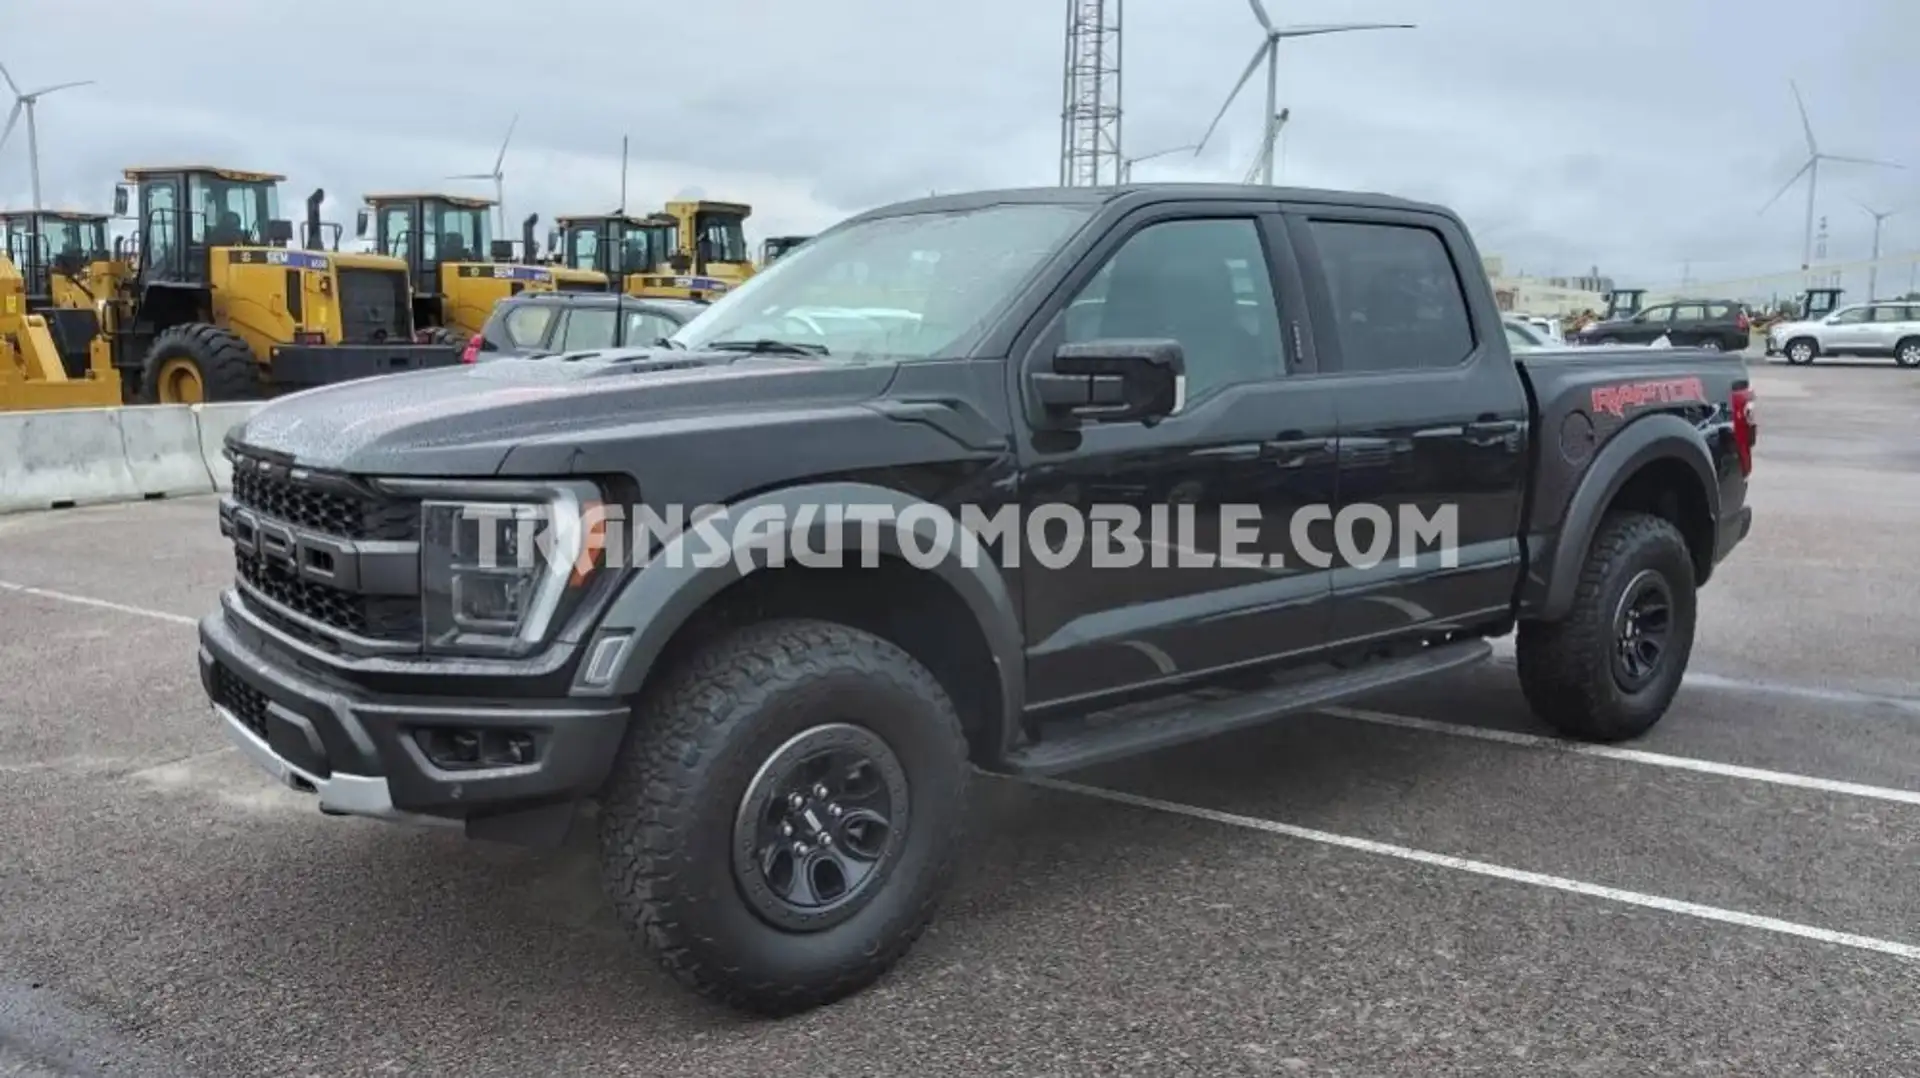 Ford F 150 RAPTOR - EXPORT OUT EU TROPICAL VERSION - EXPORT O - 1